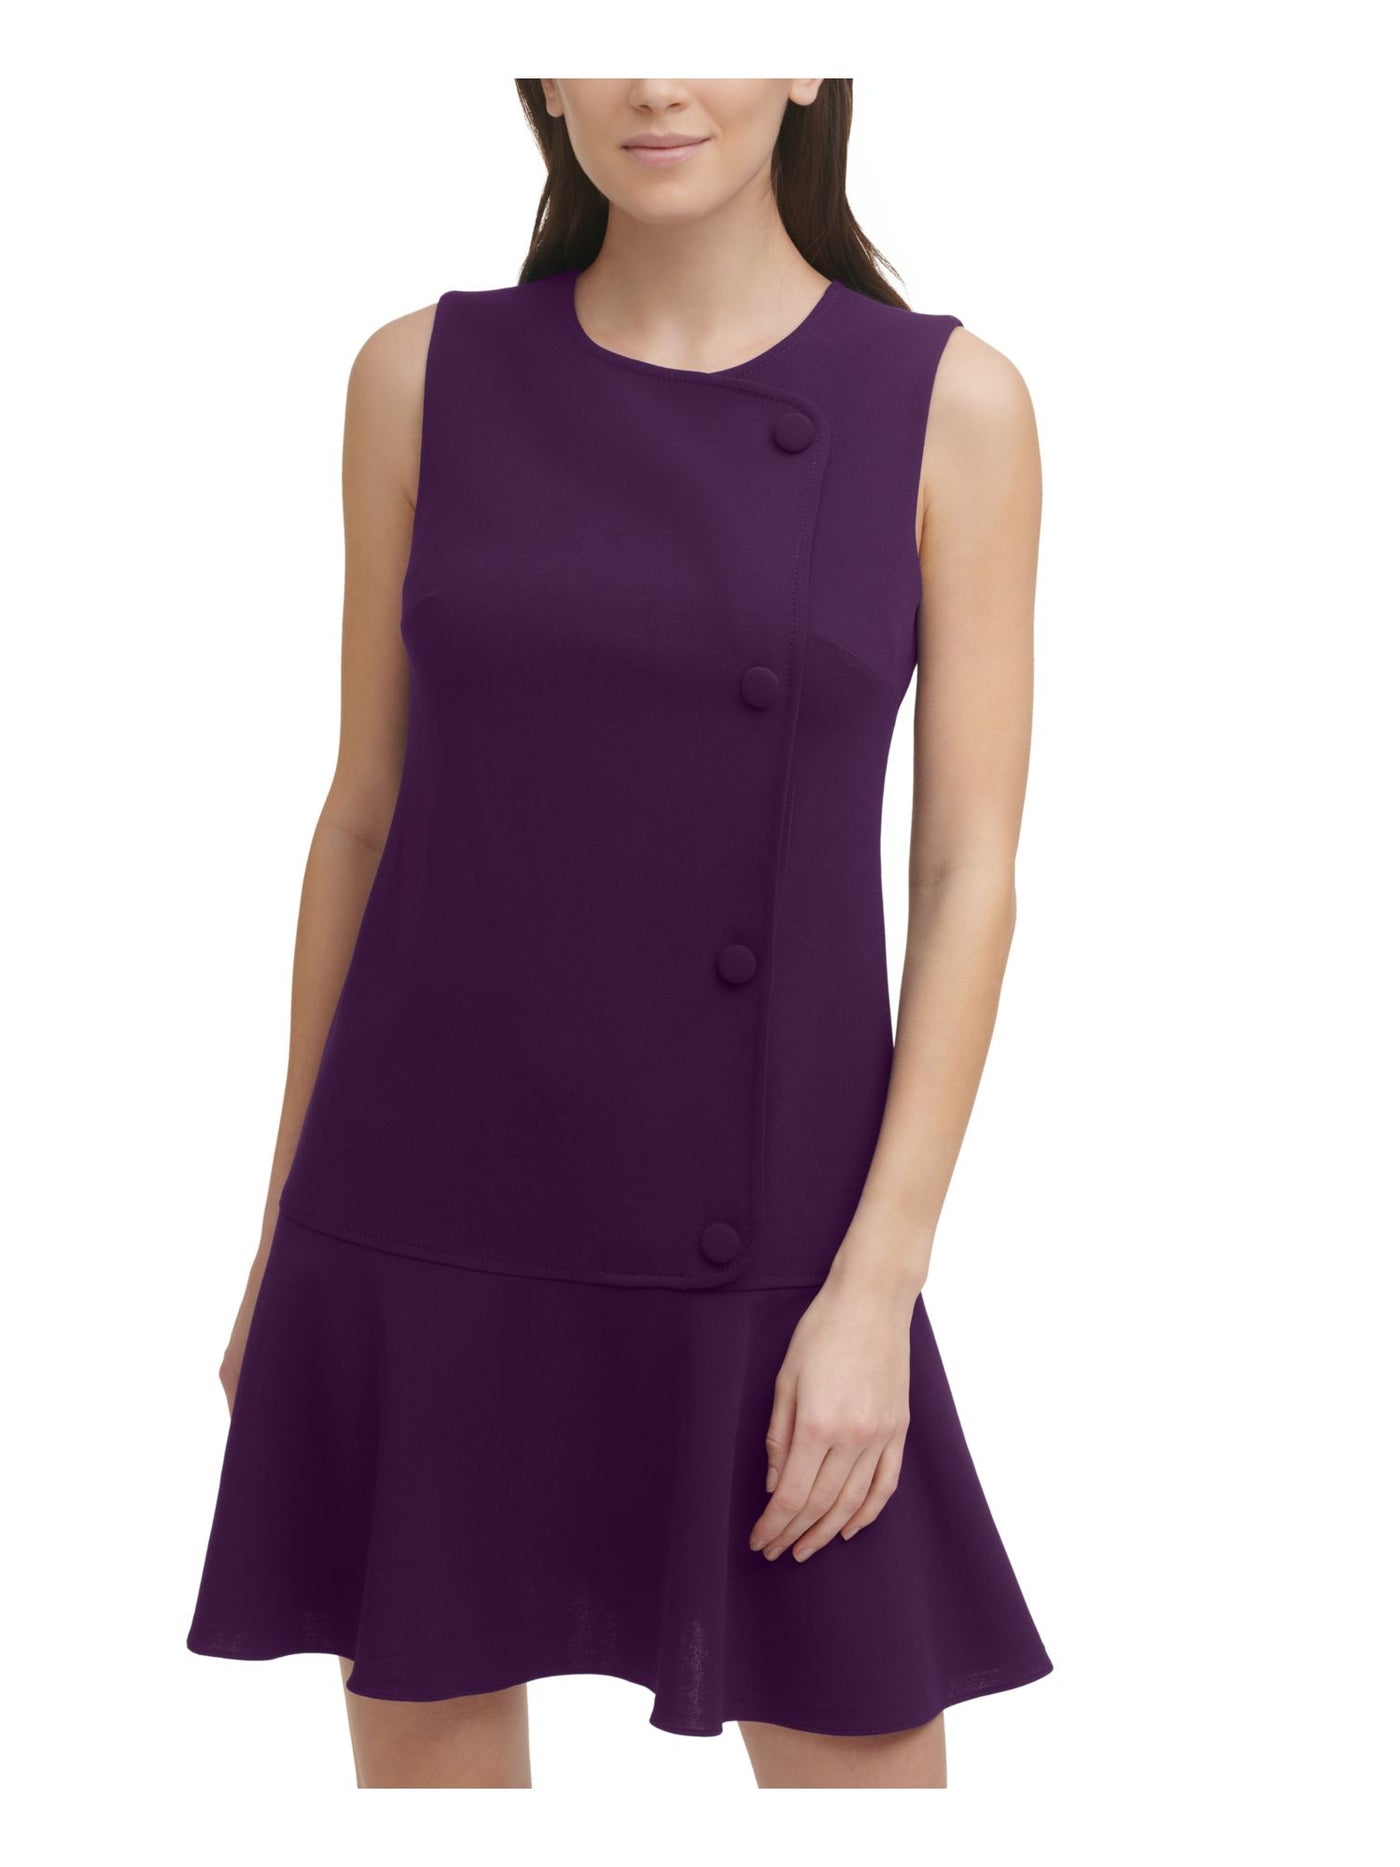 DKNY Womens Purple Stretch Zippered Fitted Faux Button Darted Sleeveless Round Neck Short Wear To Work Drop Waist Dress 2